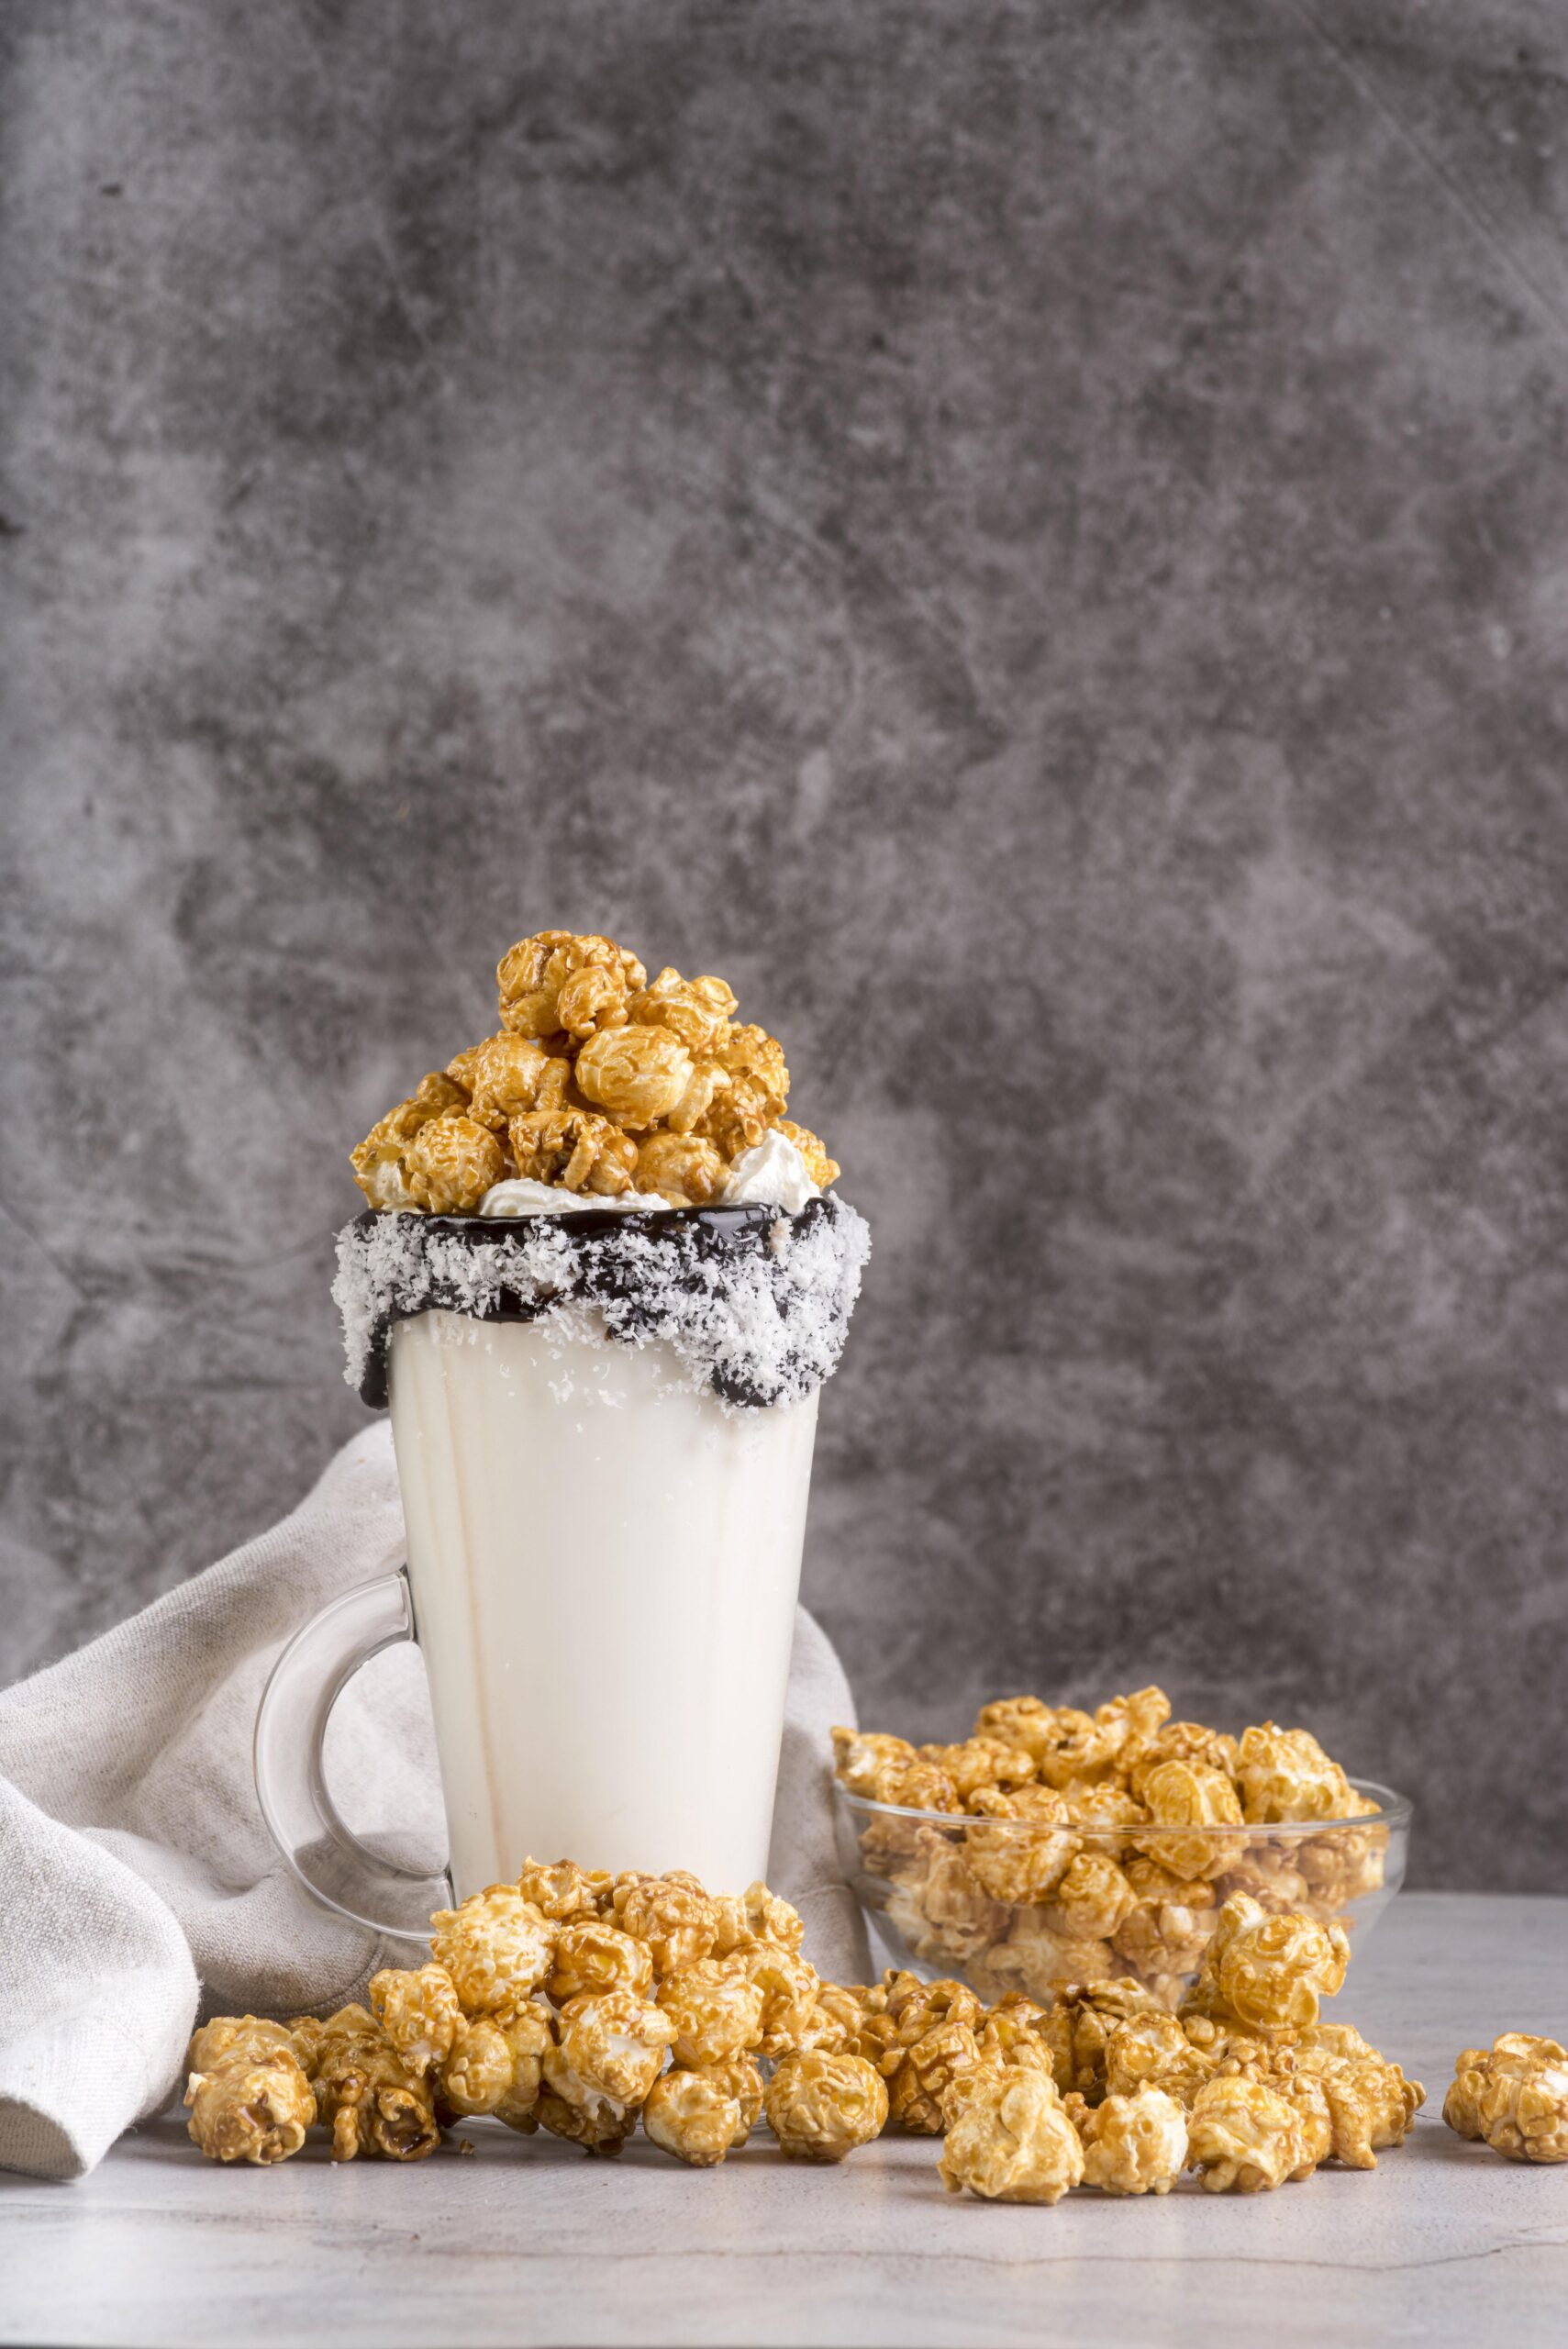 WHITE CHOCOLATE CHARDONNAY MOUSSE WITH SALTED CARAMEL POPCORN